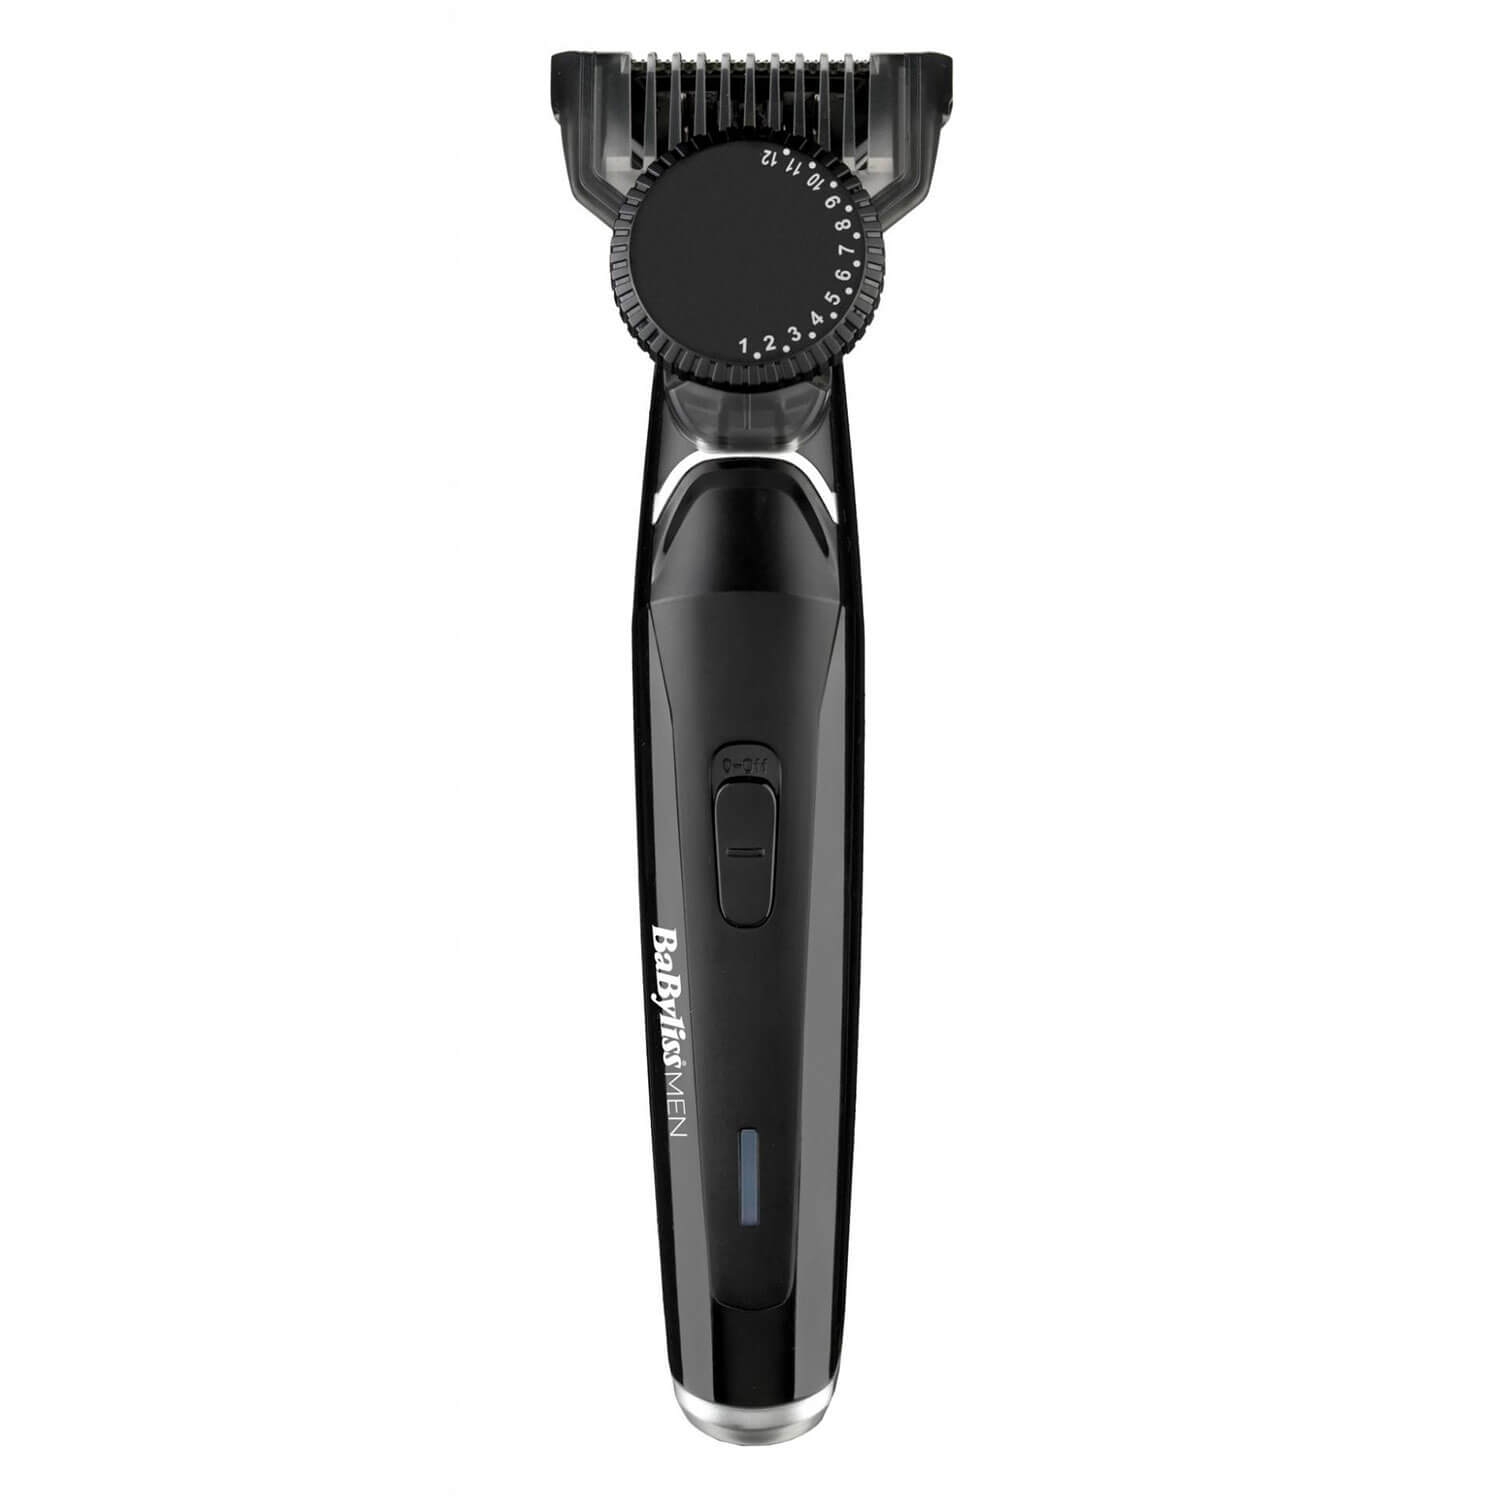 Product image from BaByliss MEN - Bartschneider Pro T881E